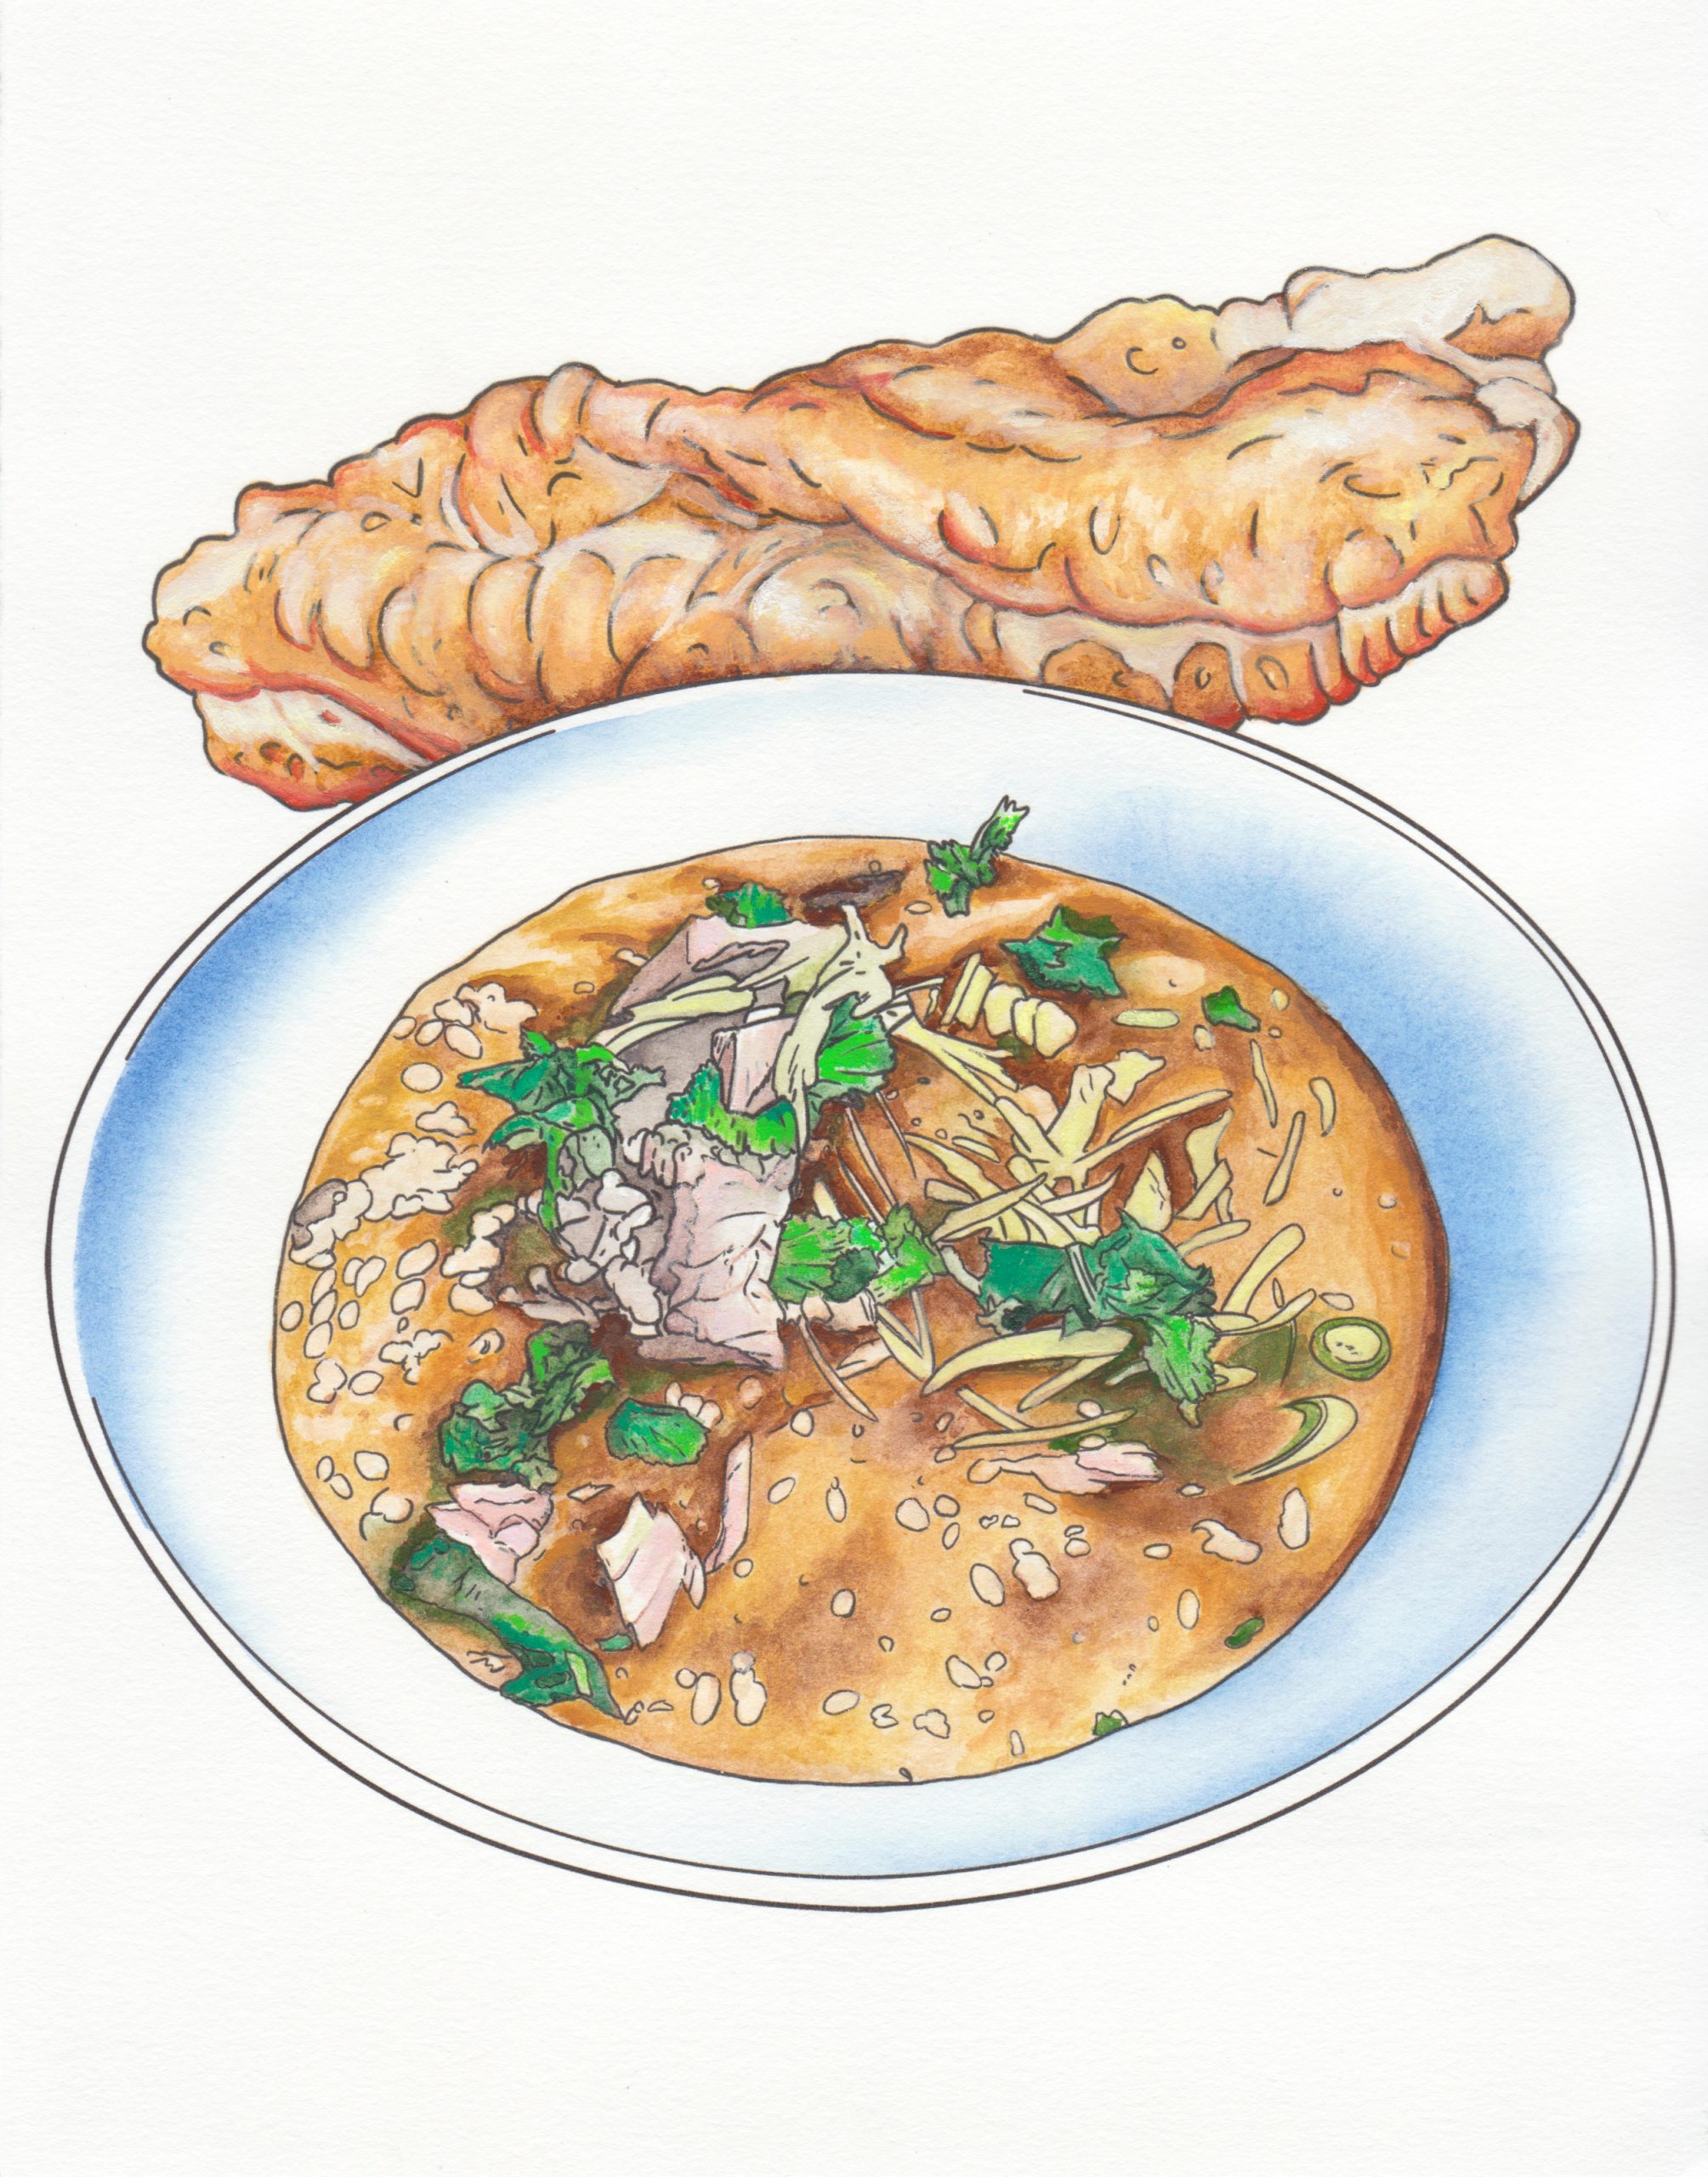  This is an illustration by Jave Yoshimoto of a deep white bowl filled with milkfish congee served with a twisted and glistening piece of Chinese fried dough on the side. The bowl is rendered in black line work with blue washes for the shadows. The congee is painted in washes of brown and tan. Linework has been used to illustrate the pinkish-gray milkfish, rice kernels in the congee, and the garnishes of pickled ginger strips, cilantro, and sliced scallions. The green of the cilantro provides an intense color contrast to this otherwise subtly earth tone and white painting.